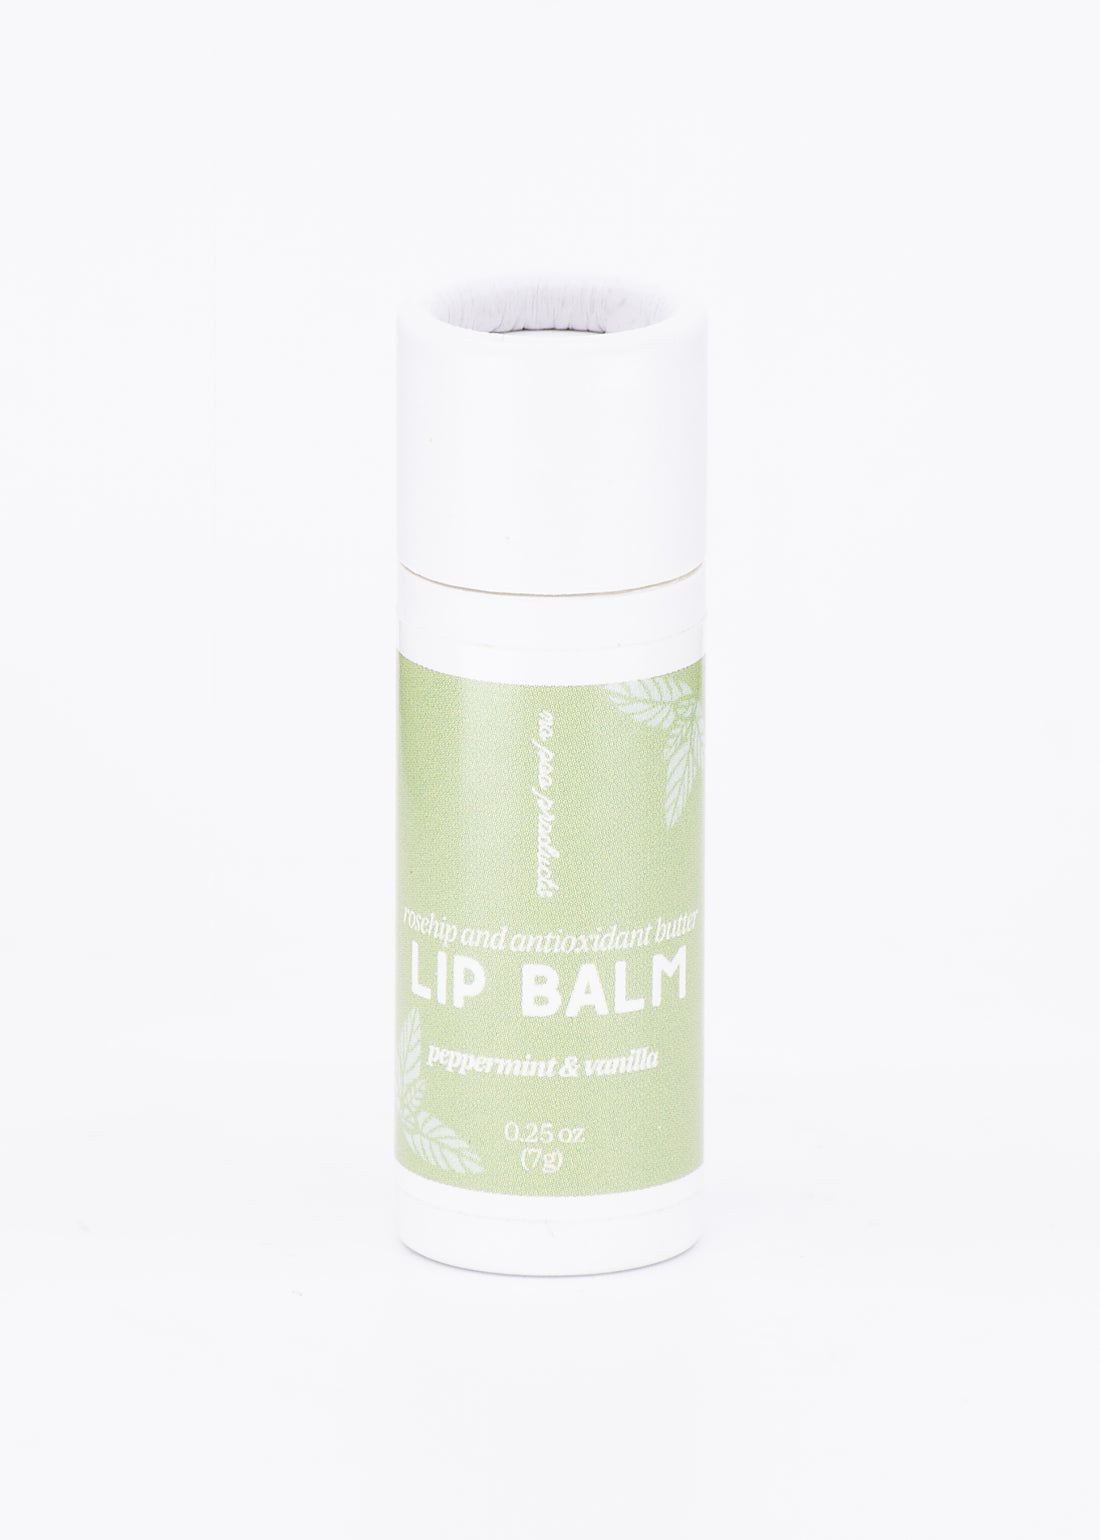 Pucker up and learn the Benefits of our lip butter balm!